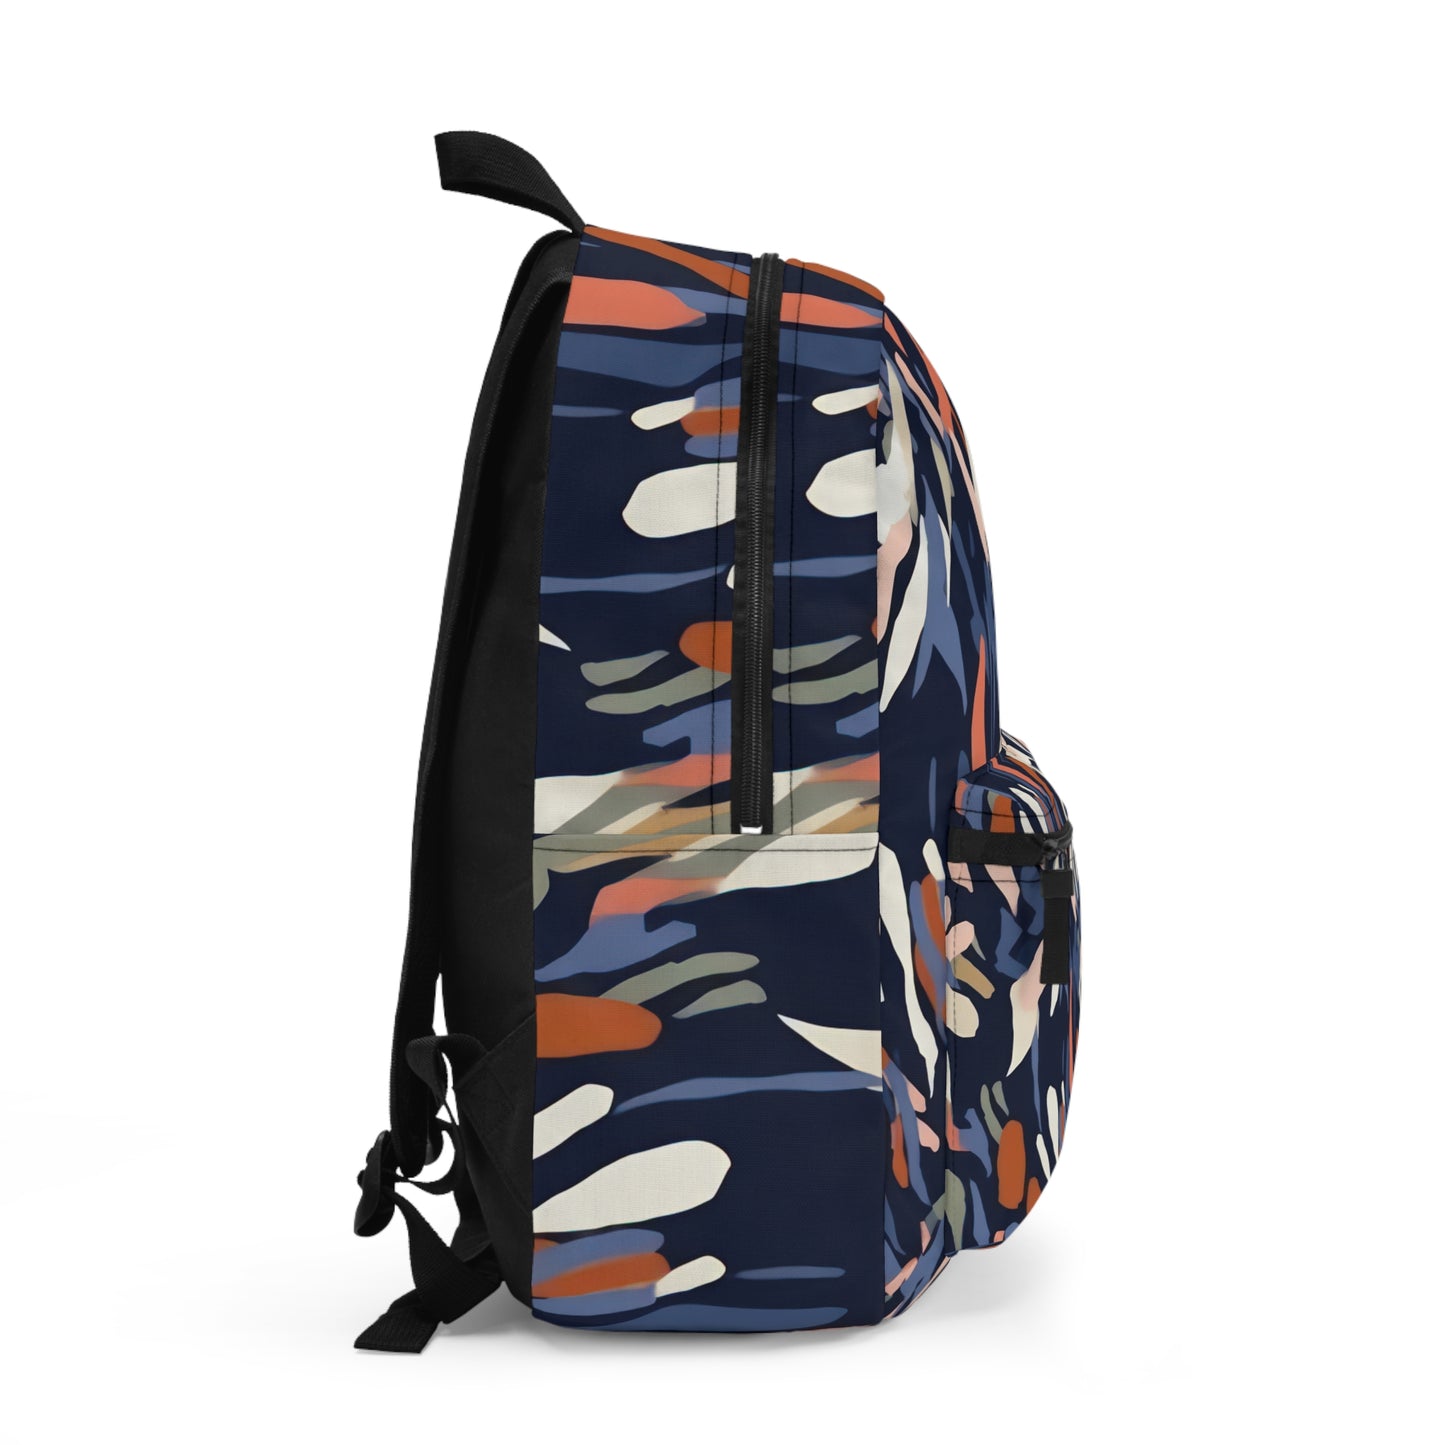 Dectro Clash Backpack